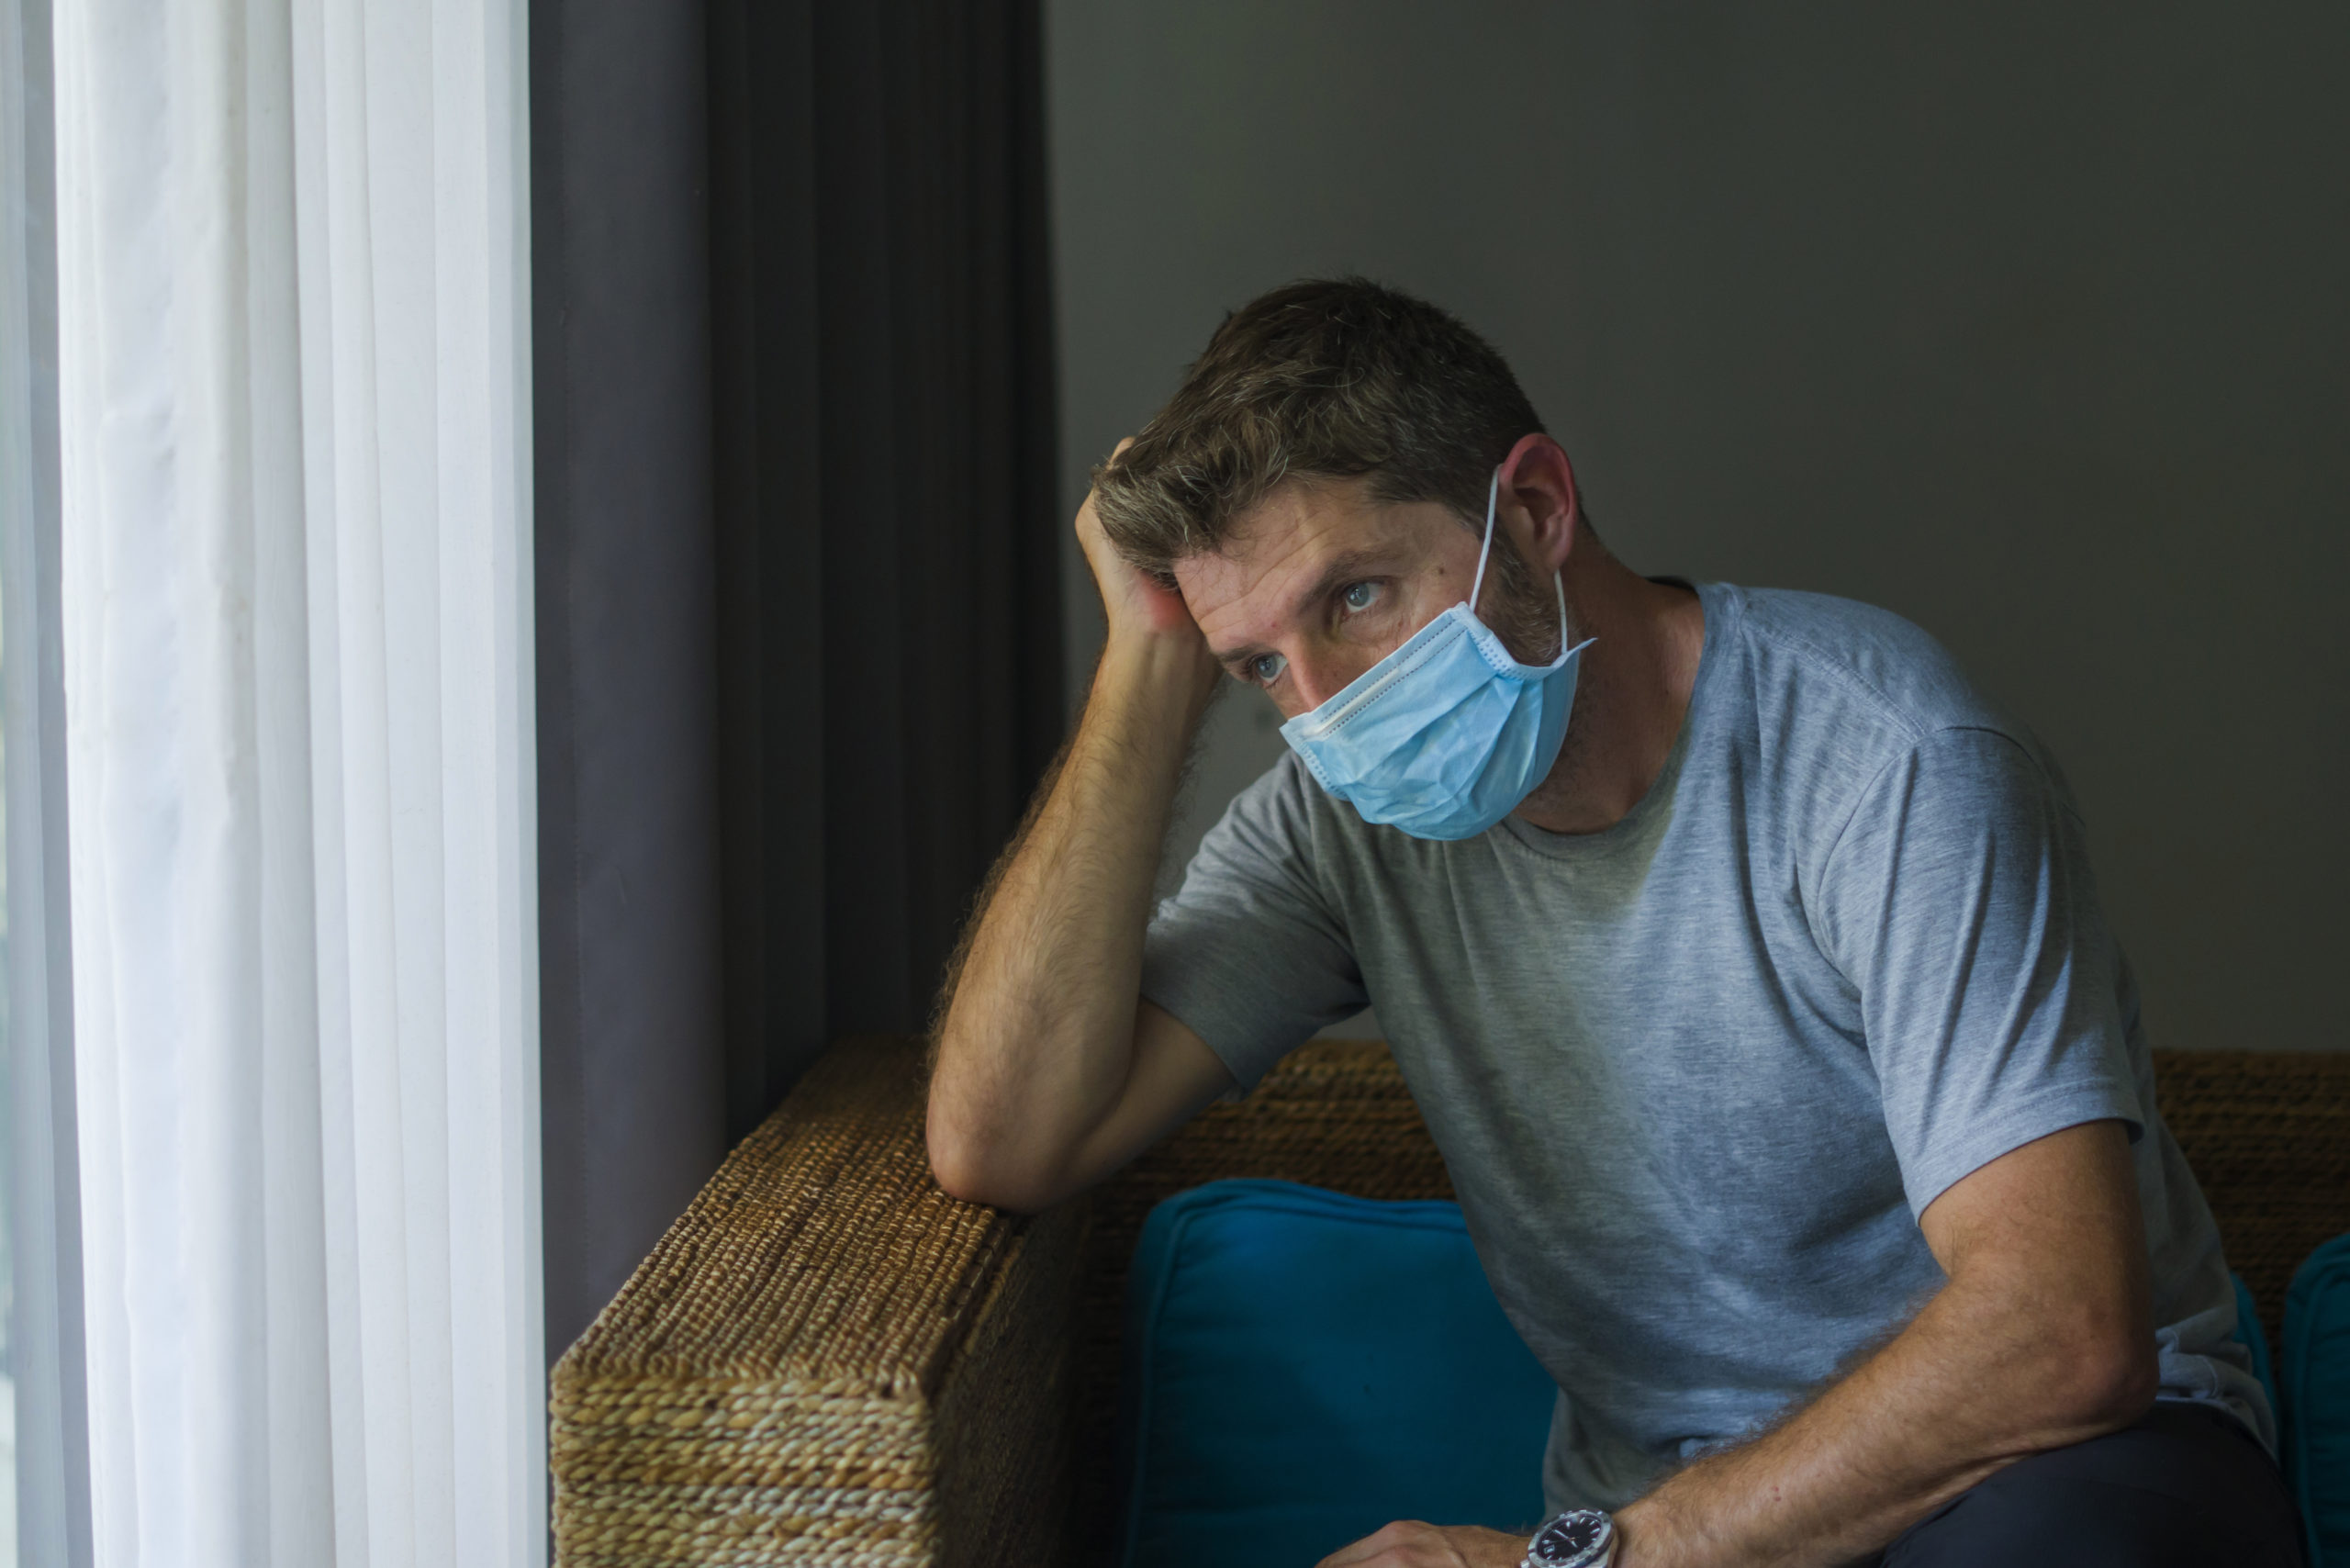 covid-19 virus lockdown - sad and worried man in medical mask thinking and feeling scared in quarantine following stay at home instructions to contain virus pandemic